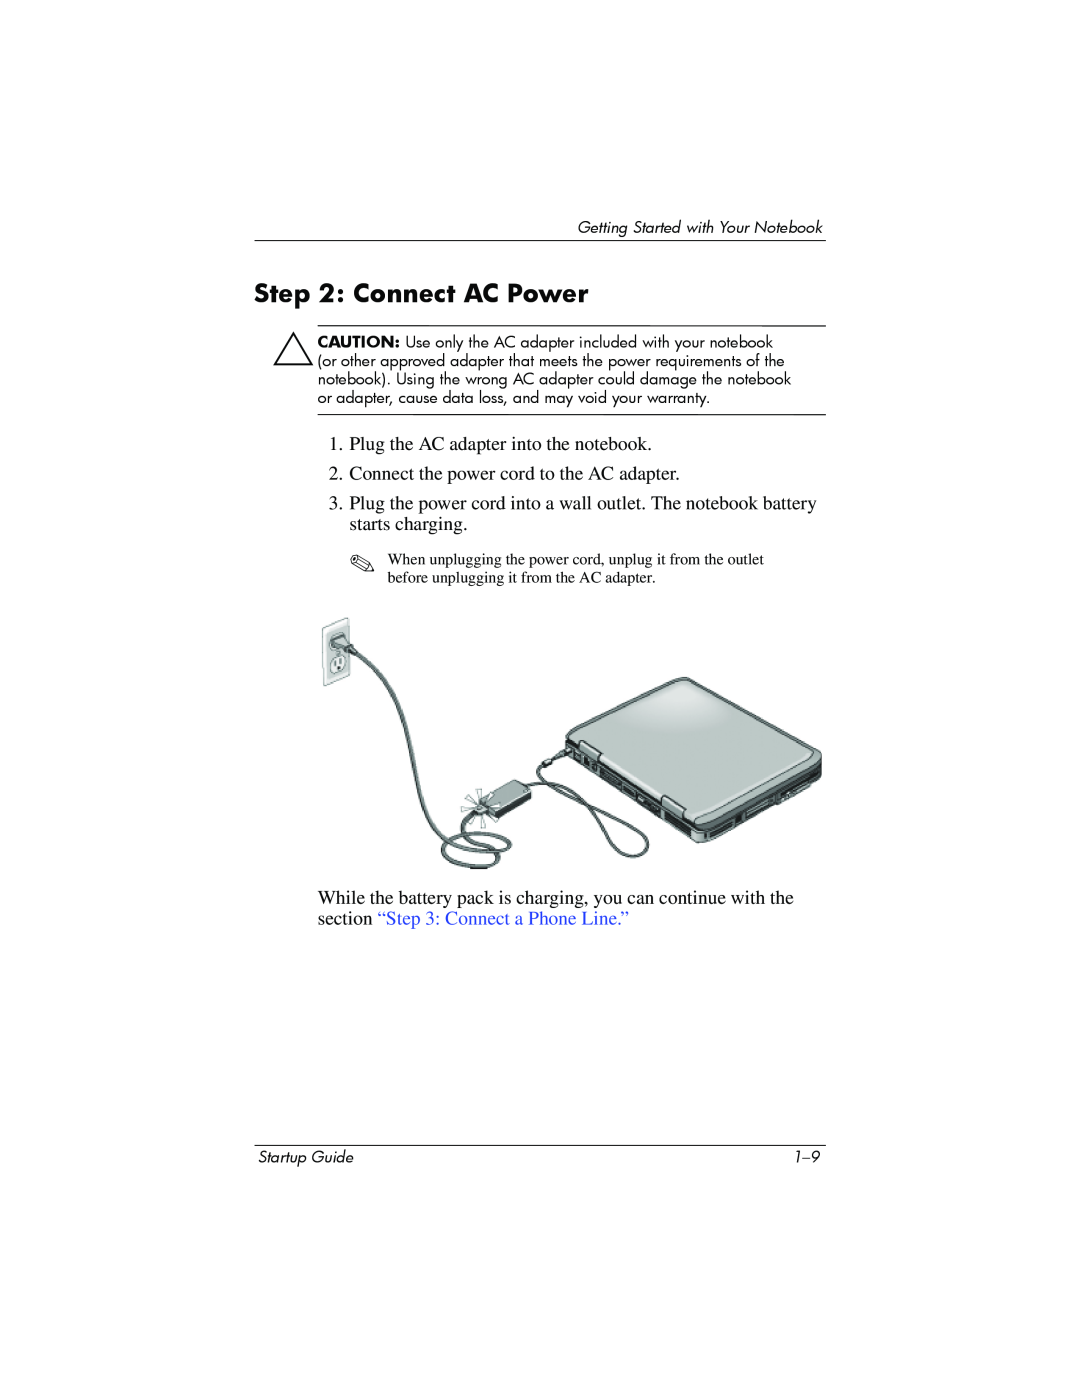 Compaq Personal Computer manual Connect AC Power 